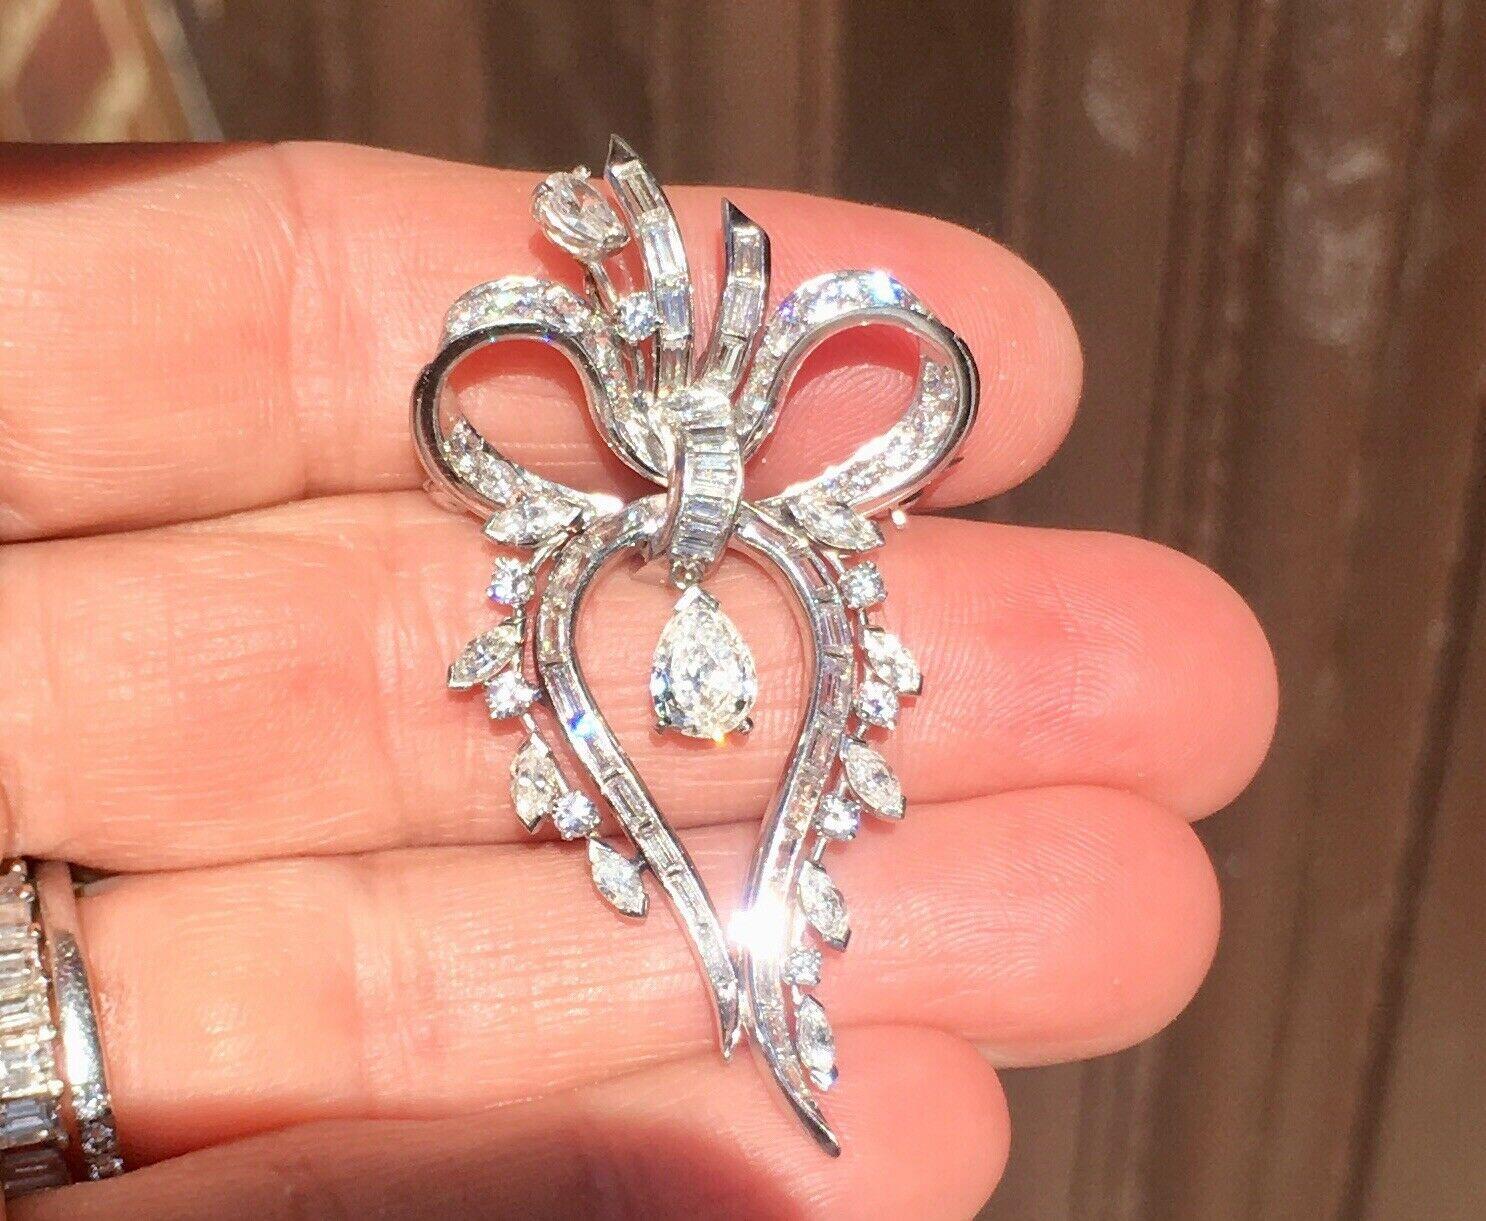 Stunning 1950s Retro Deco Platinum 3.00 ct G/VS Diamond Brooch Pin Pendant for Necklace

Stunning platinum pendant / brooch designed as a bow set with 
high quality G-H VS pear, marquise, baguette, and full-cut round brilliant diamonds.

Approximate